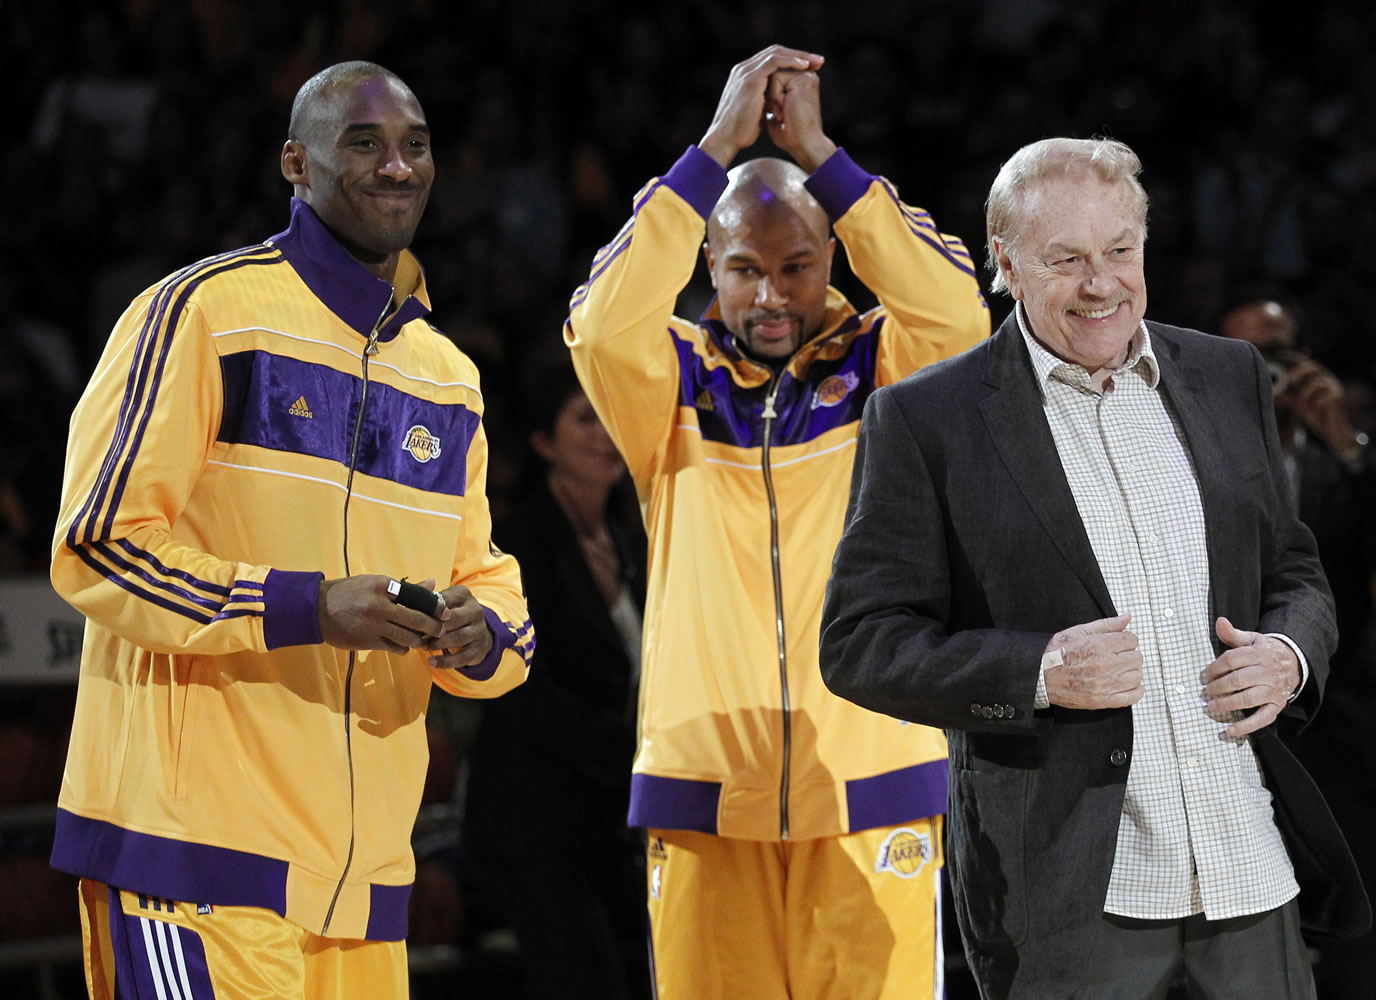 Los Angeles Laker owner Jerry Buss, right, walks out onto the court on Oct. 26, 2010, during the NBA championship ring ceremony as Kobe Bryant, left, and Derek Fisher look on before a basketball game against the Houston Rockets in Los Angeles. Buss, the Lakers' playboy owner who shepherded the NBA franchise to 10 championships, has died.